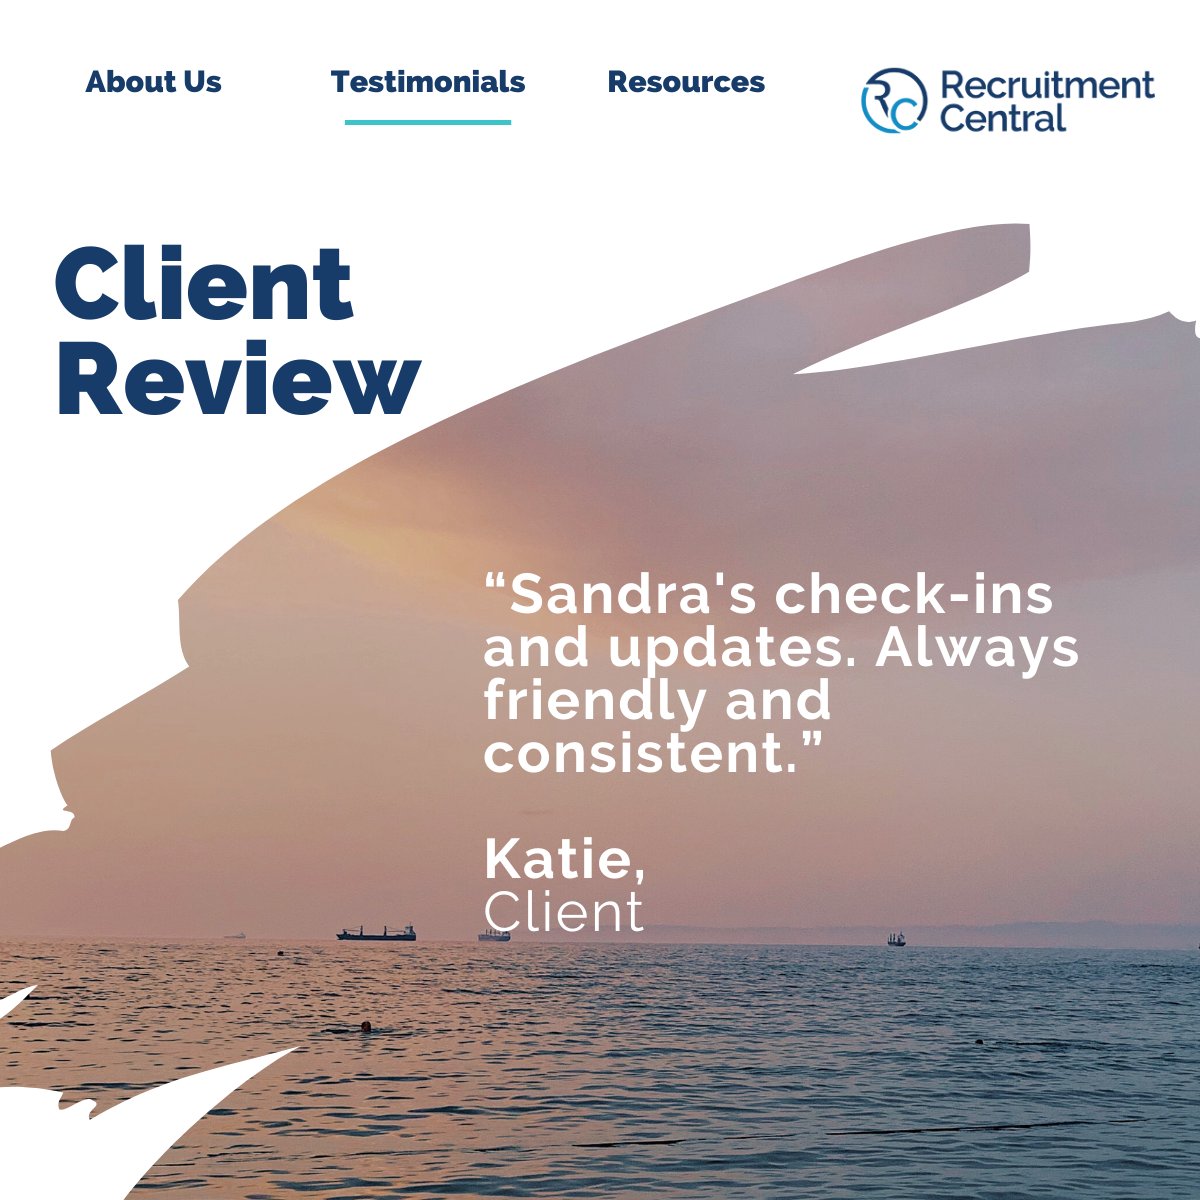 We're so happy to have such a nice review from one of our awesome clients. We genuinely appreciate the trust and confidence you have in us.
Thank you for your support, it means the world to us!

#recruitmentcentral #brisbanerecruiters #recruitmenttrends